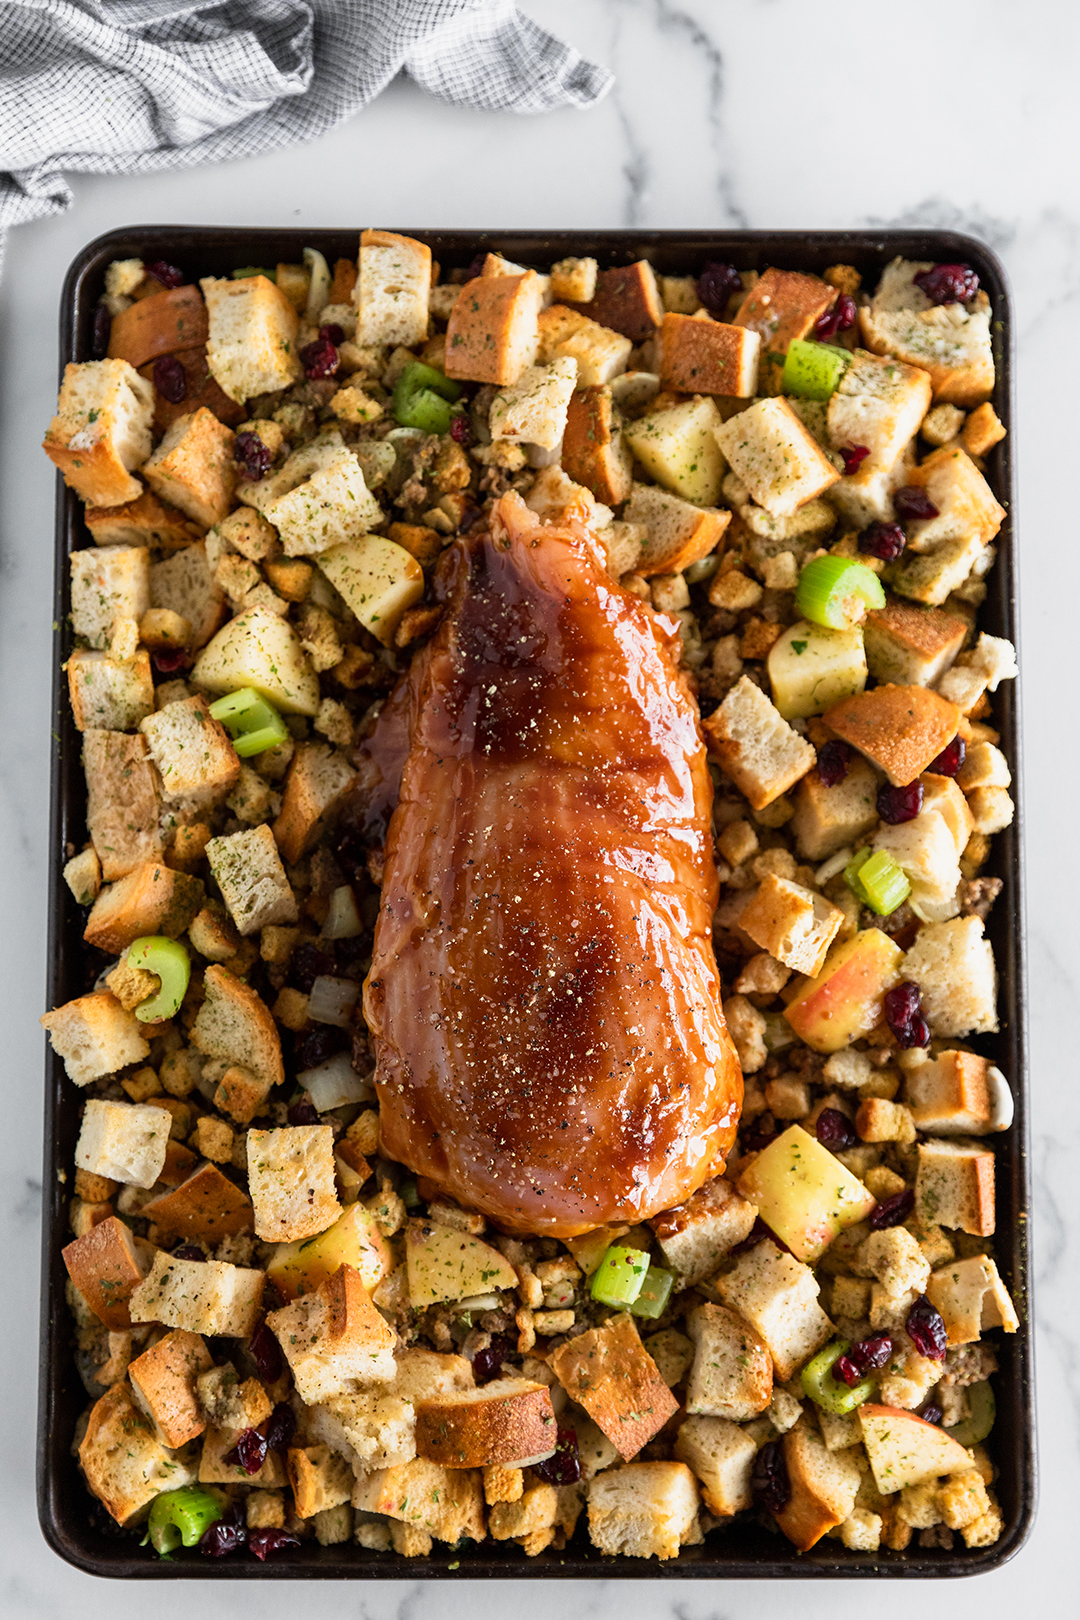 https://www.number-2-pencil.com/wp-content/uploads/2022/12/Sheet-Pan-Garlic-Butter-Turkey-Breast-and-Stuffing-2-2.jpg